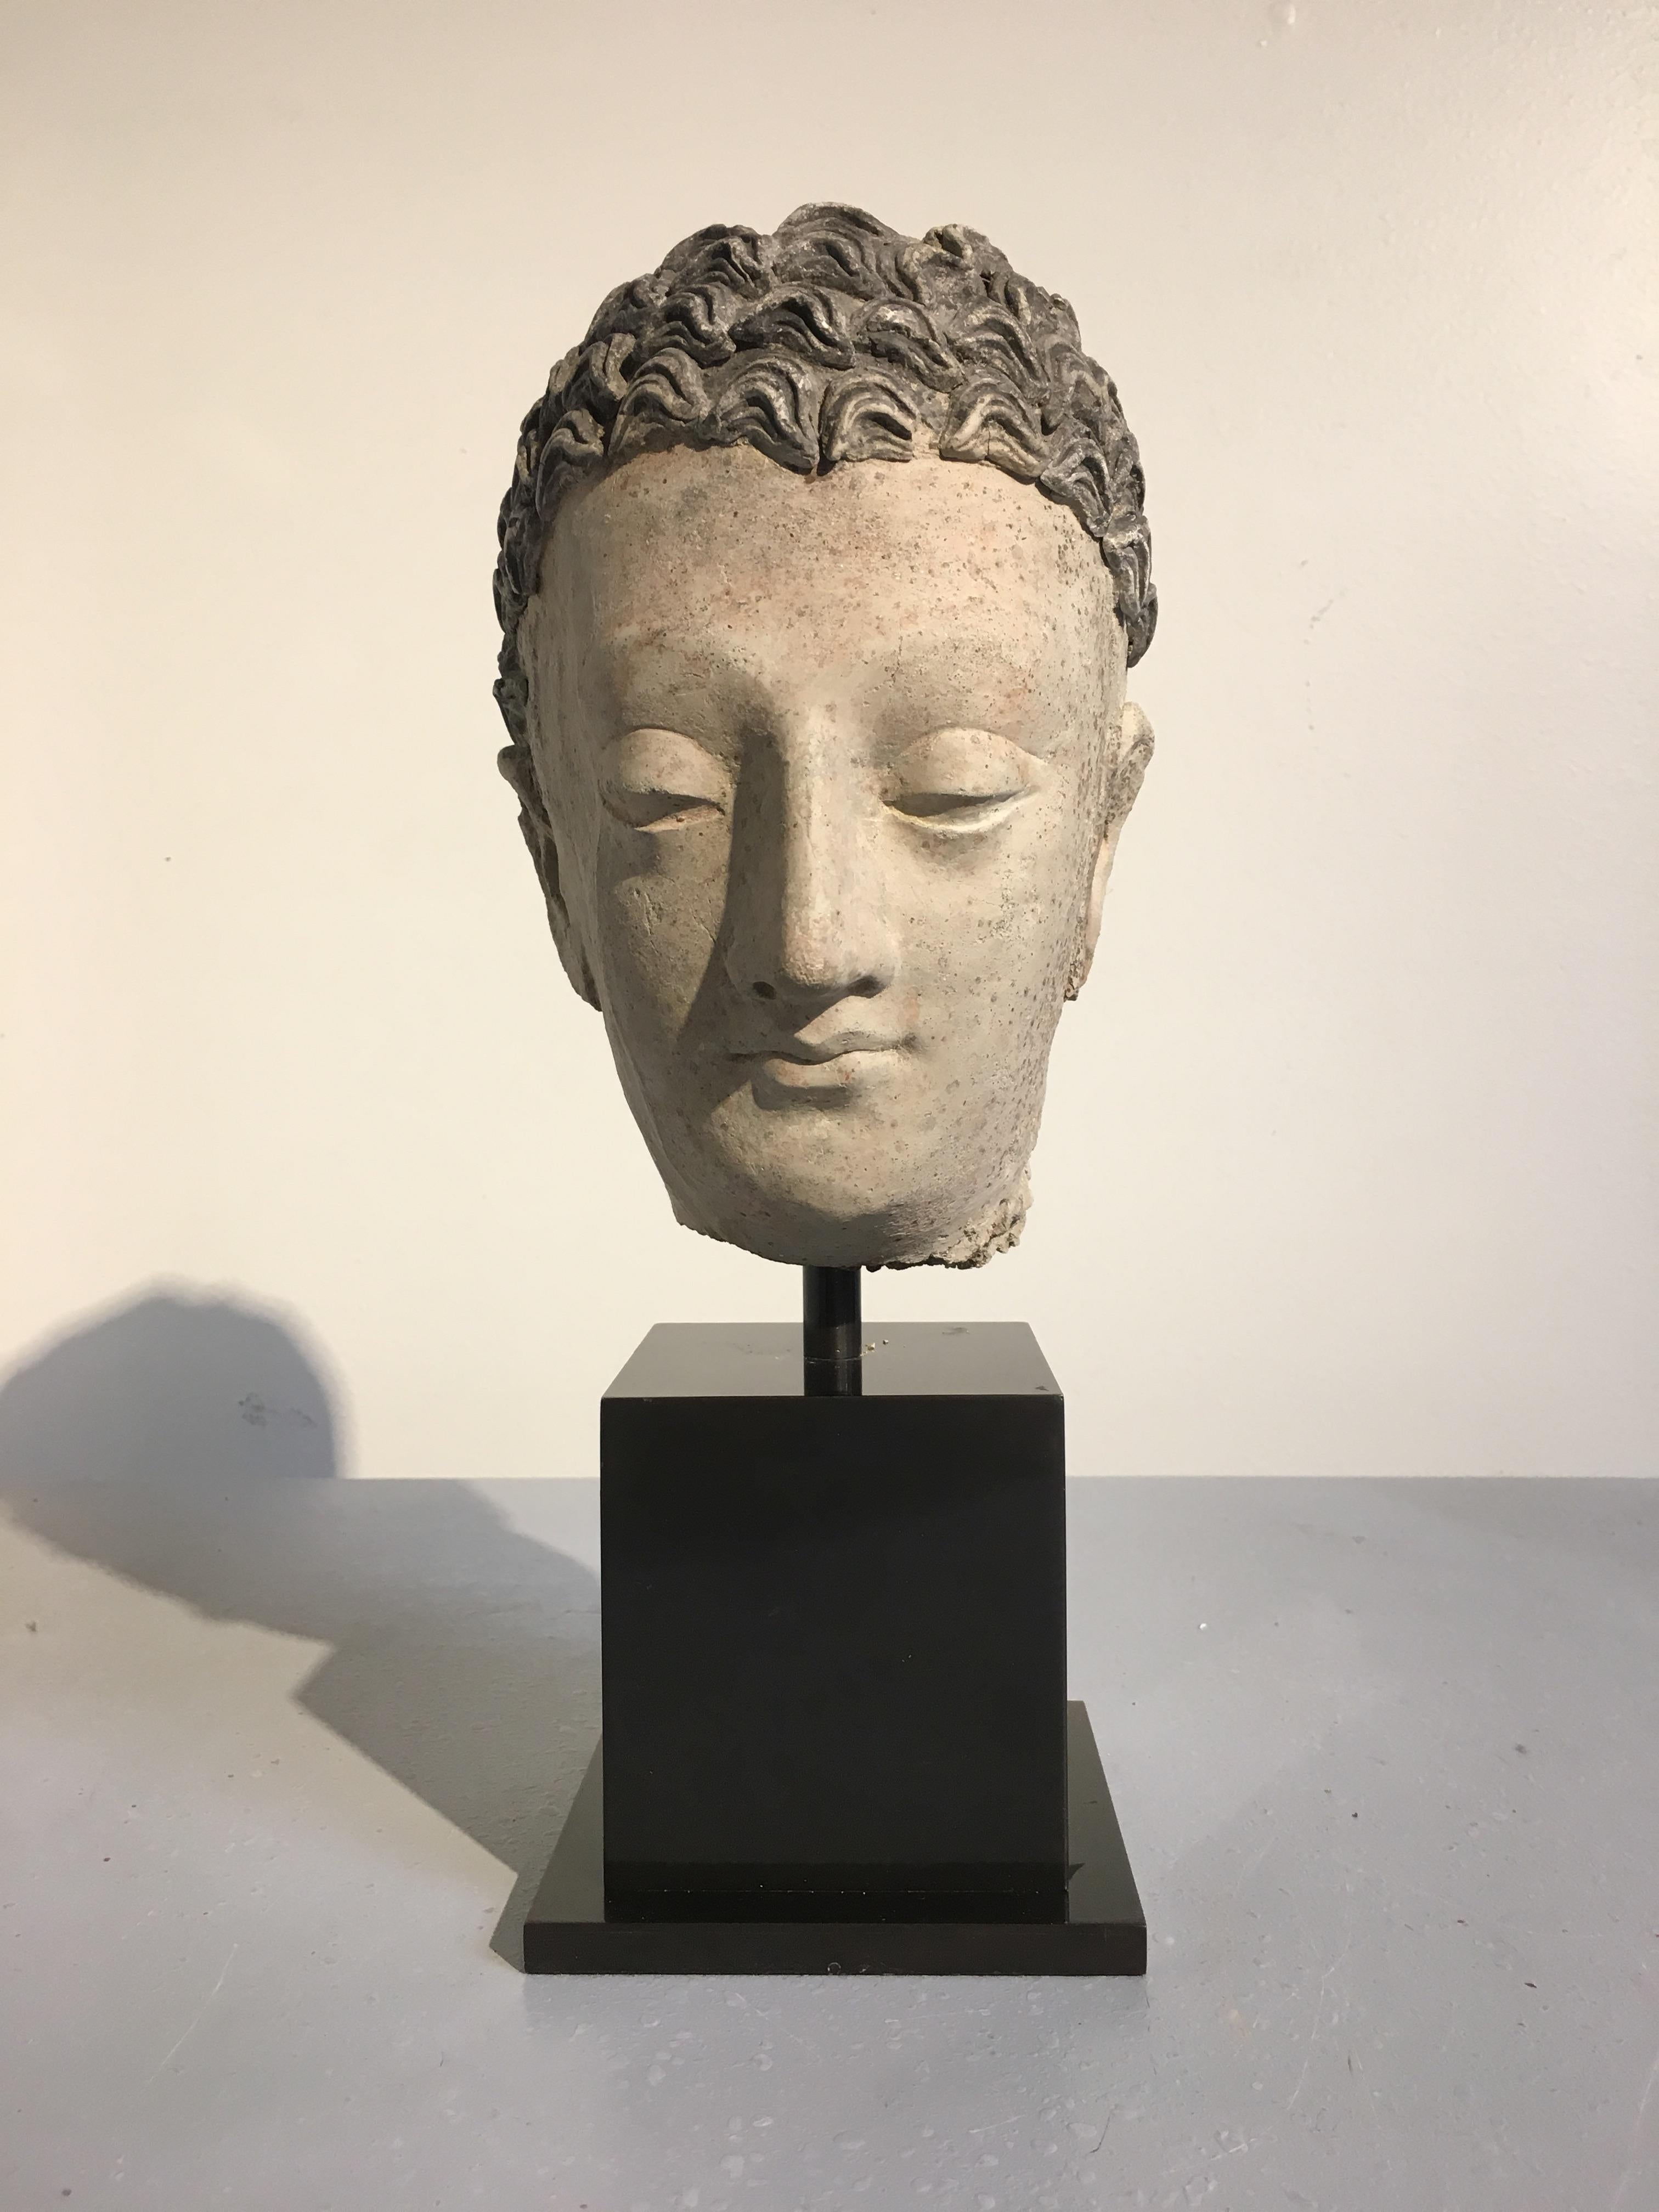 A sublime Greco-Buddhist stucco head of the Buddha, ancient region of Gandhara, circa 3rd-5th century. 

A fragment of a larger statue, the Buddha's face is contemplative, with heavily lidded almond shaped eyes that gaze downwards, a patrician